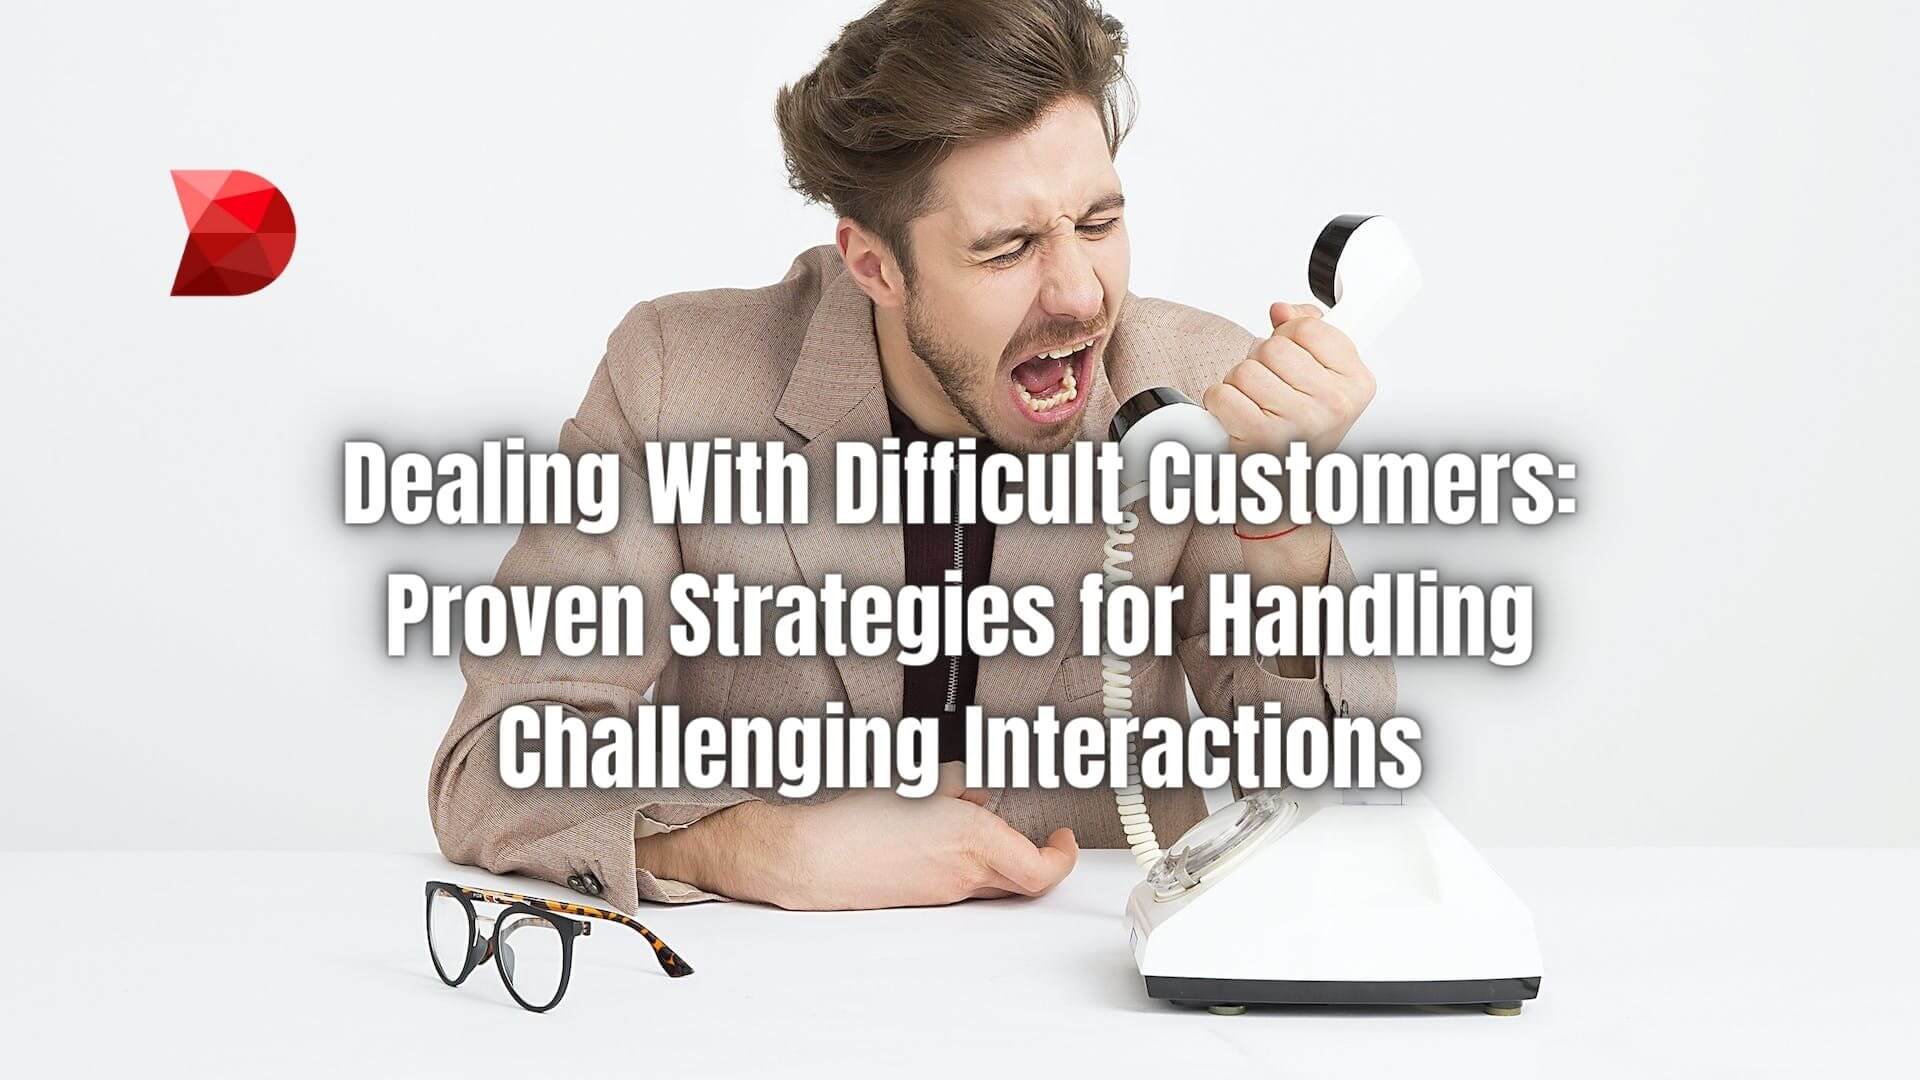 Master challenging interactions with our proven guide! Click here to learn effective strategies for dealing with difficult customers.